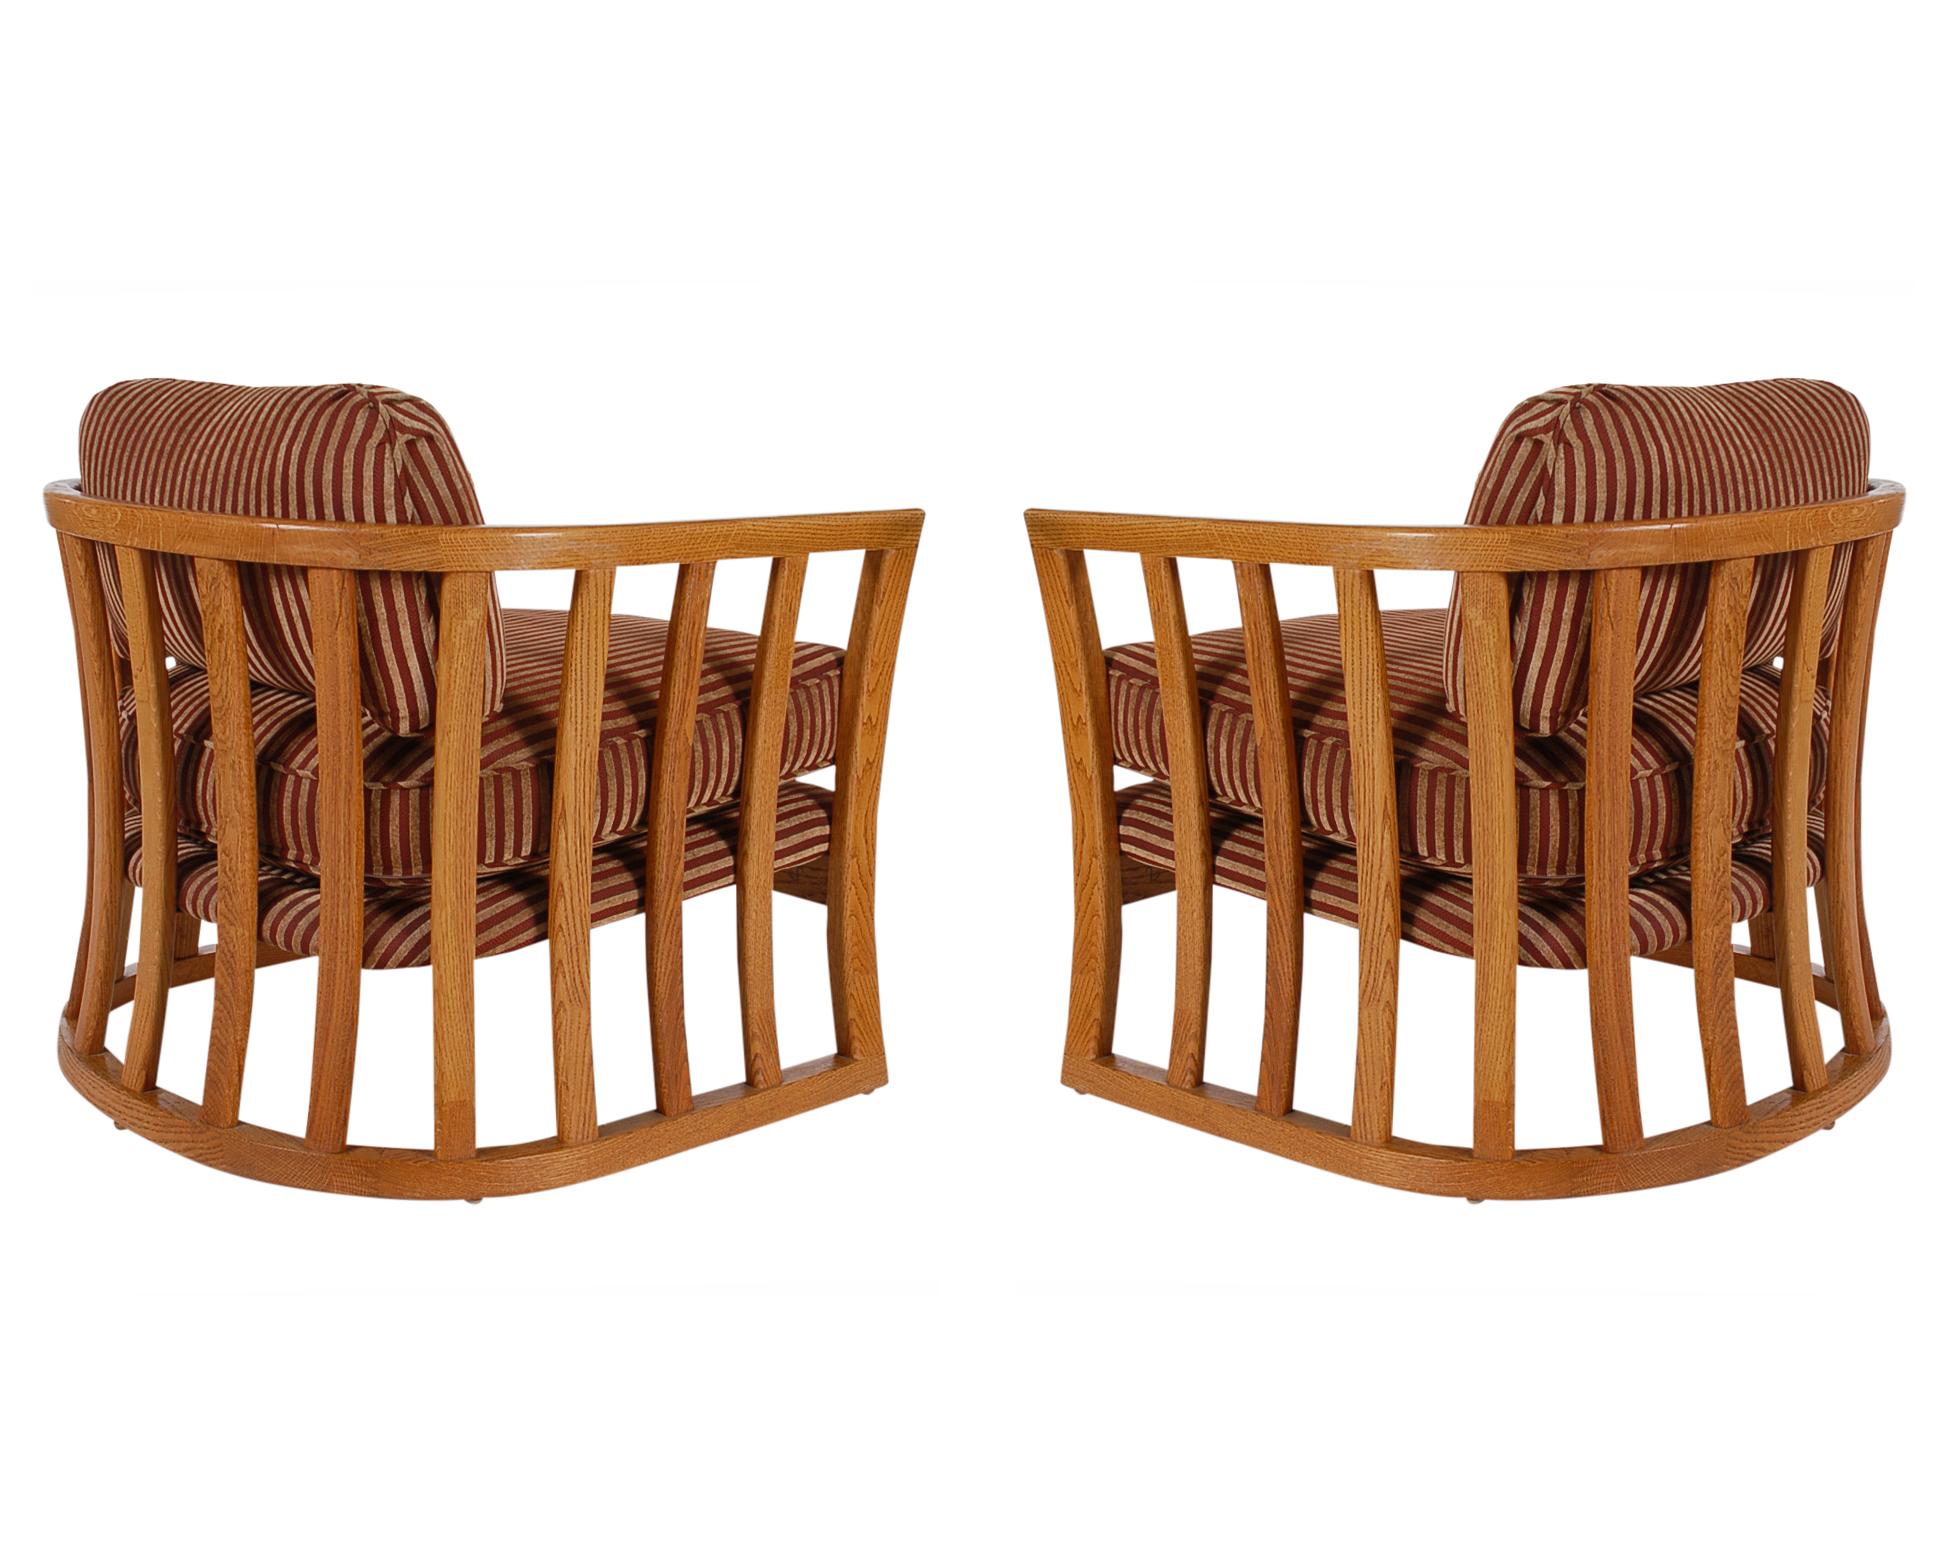 Late 20th Century Matching Pair of Mid-Century Modern Spindle Back Barrel Lounge Chairs in Oak